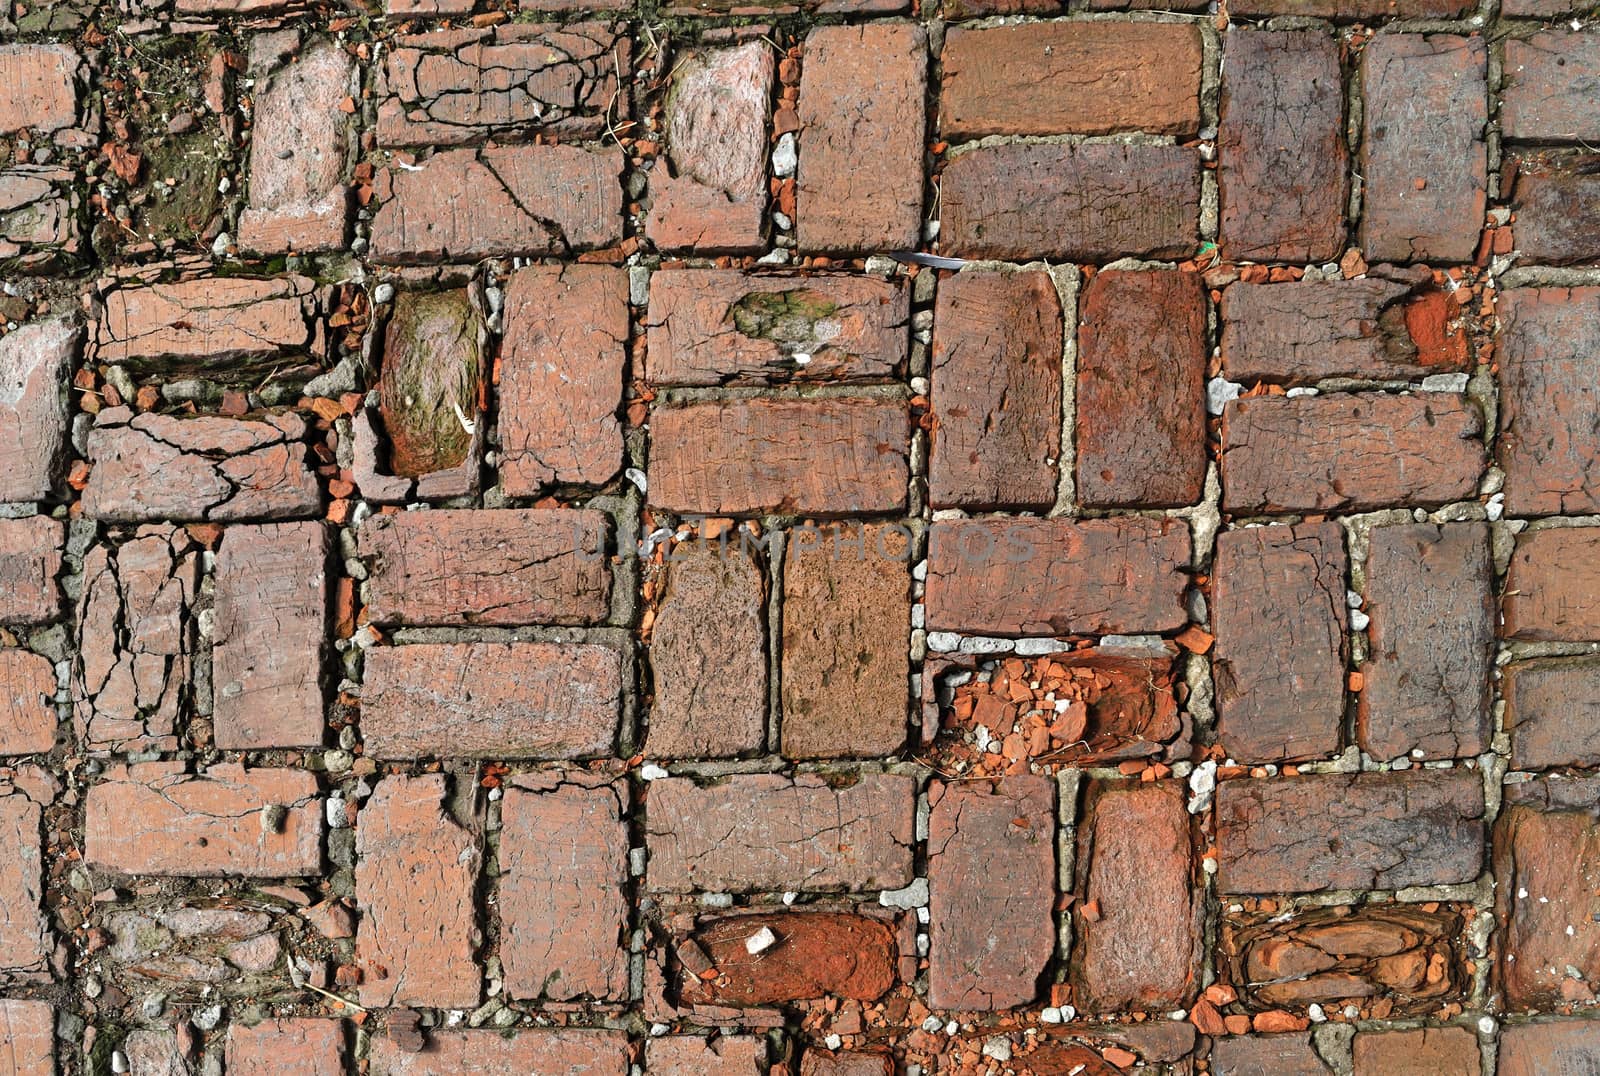 Fragment of old rough red brick pavement surface